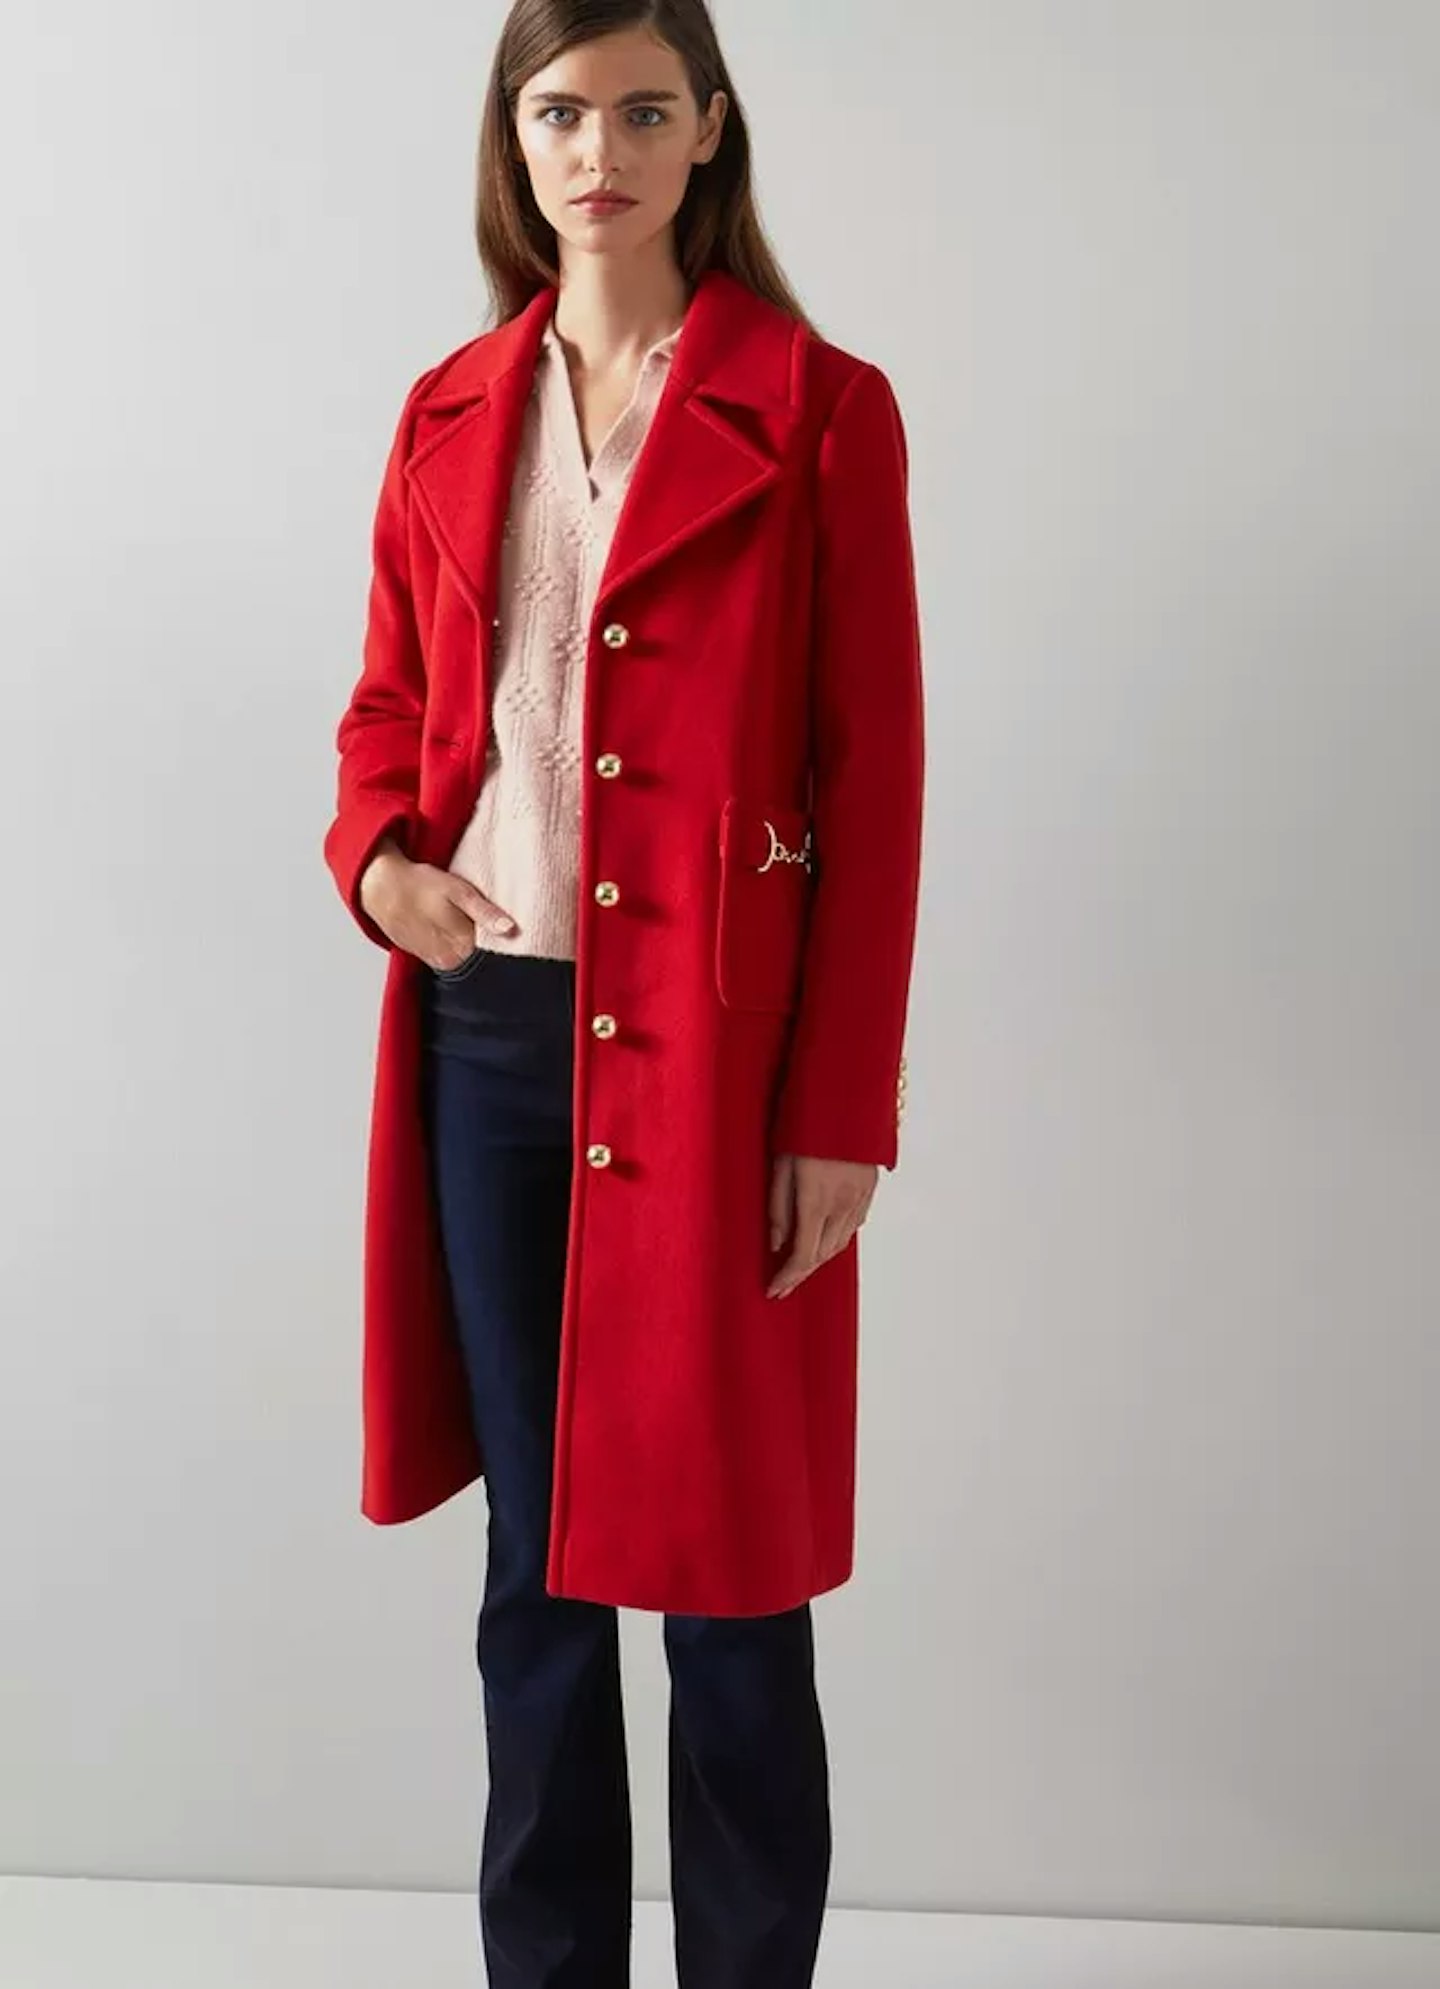 The Best Red Coats As Loved By The Princess Of Wales